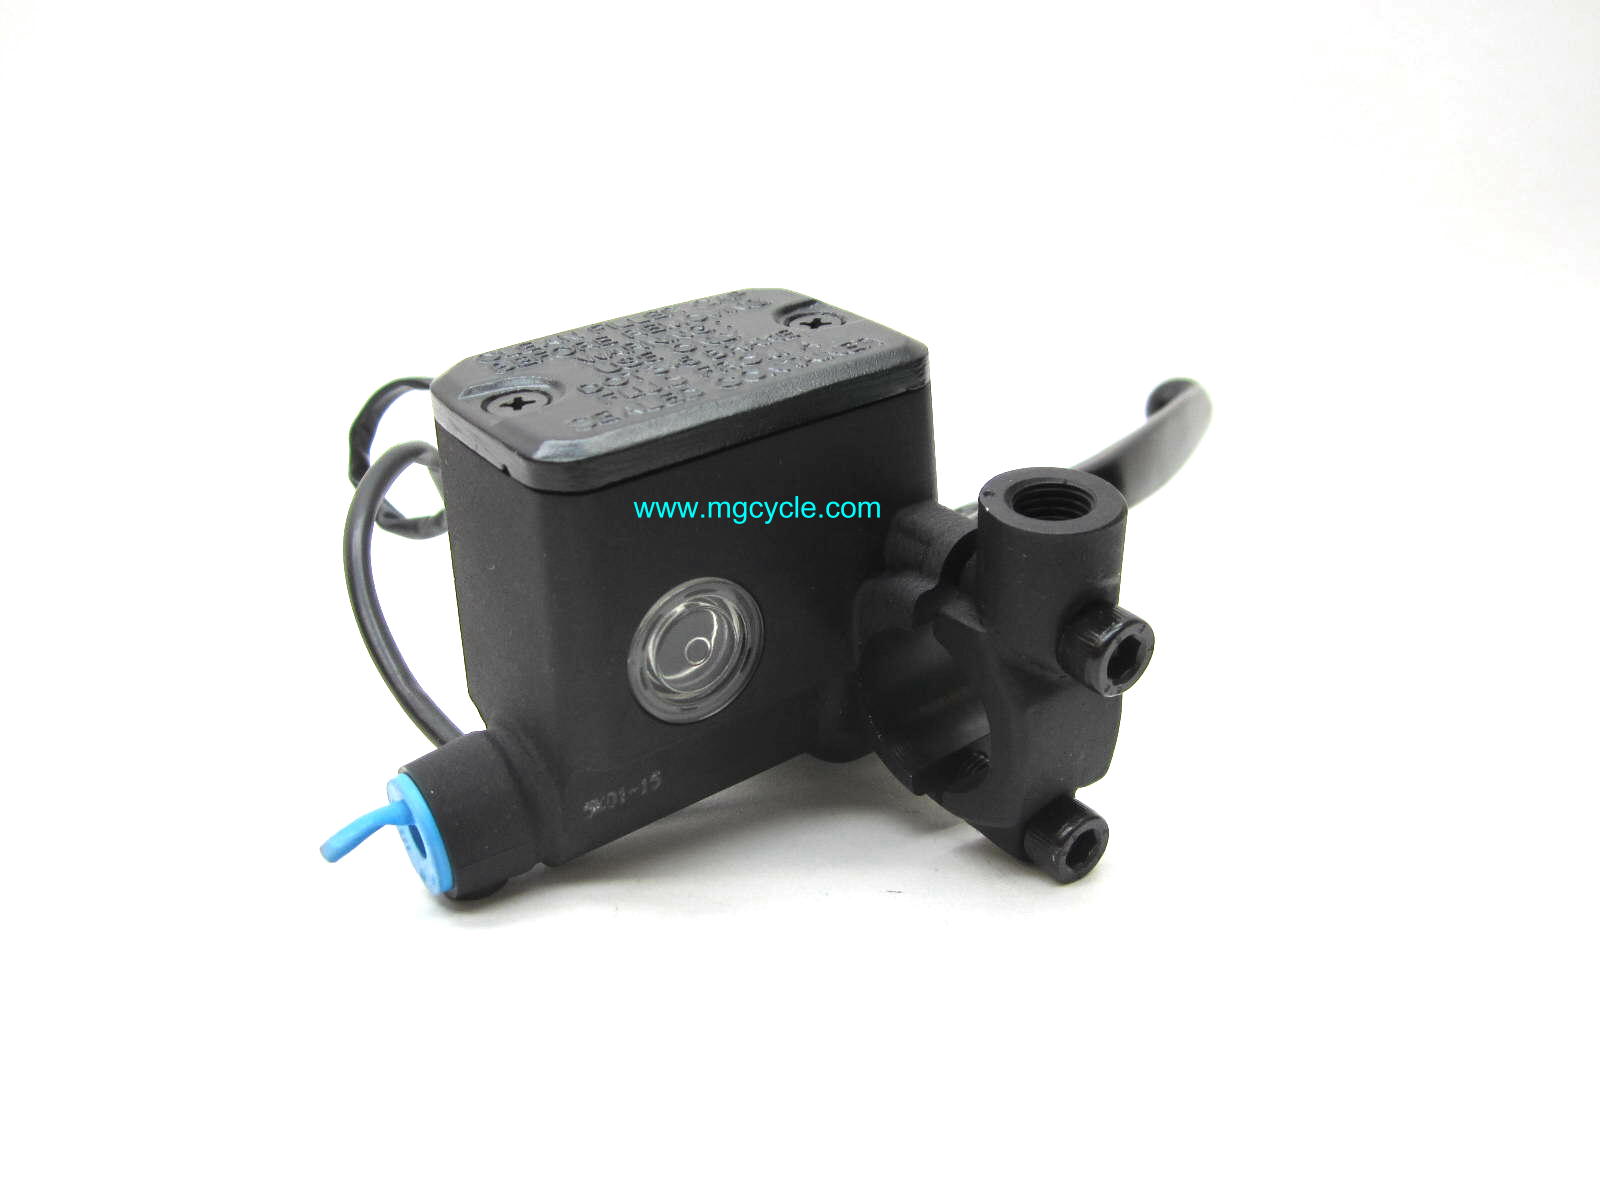 Brembo 15mm master cylinder, black lever, with switch & wires